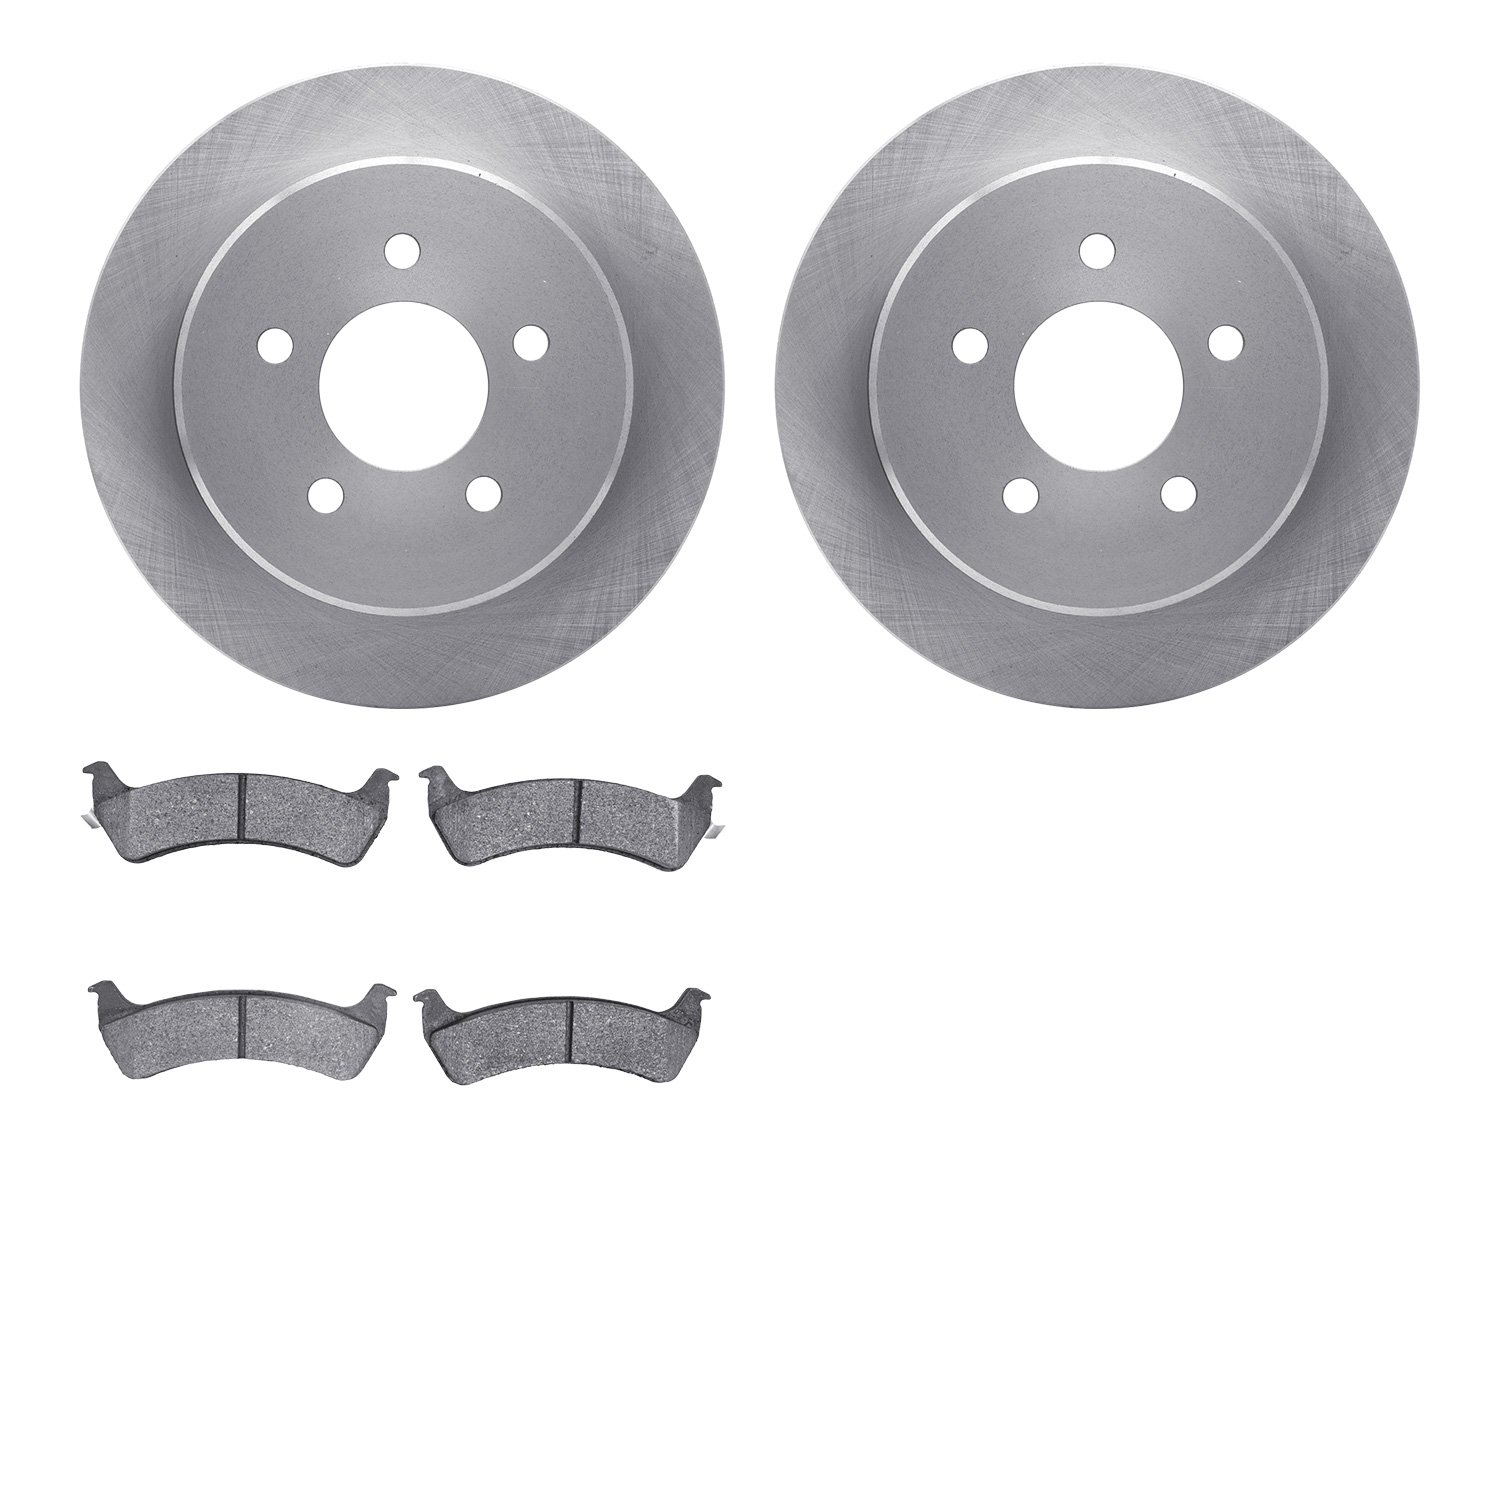 6402-54089 Brake Rotors with Ultimate-Duty Brake Pads, 2001-2002 Ford/Lincoln/Mercury/Mazda, Position: Rear